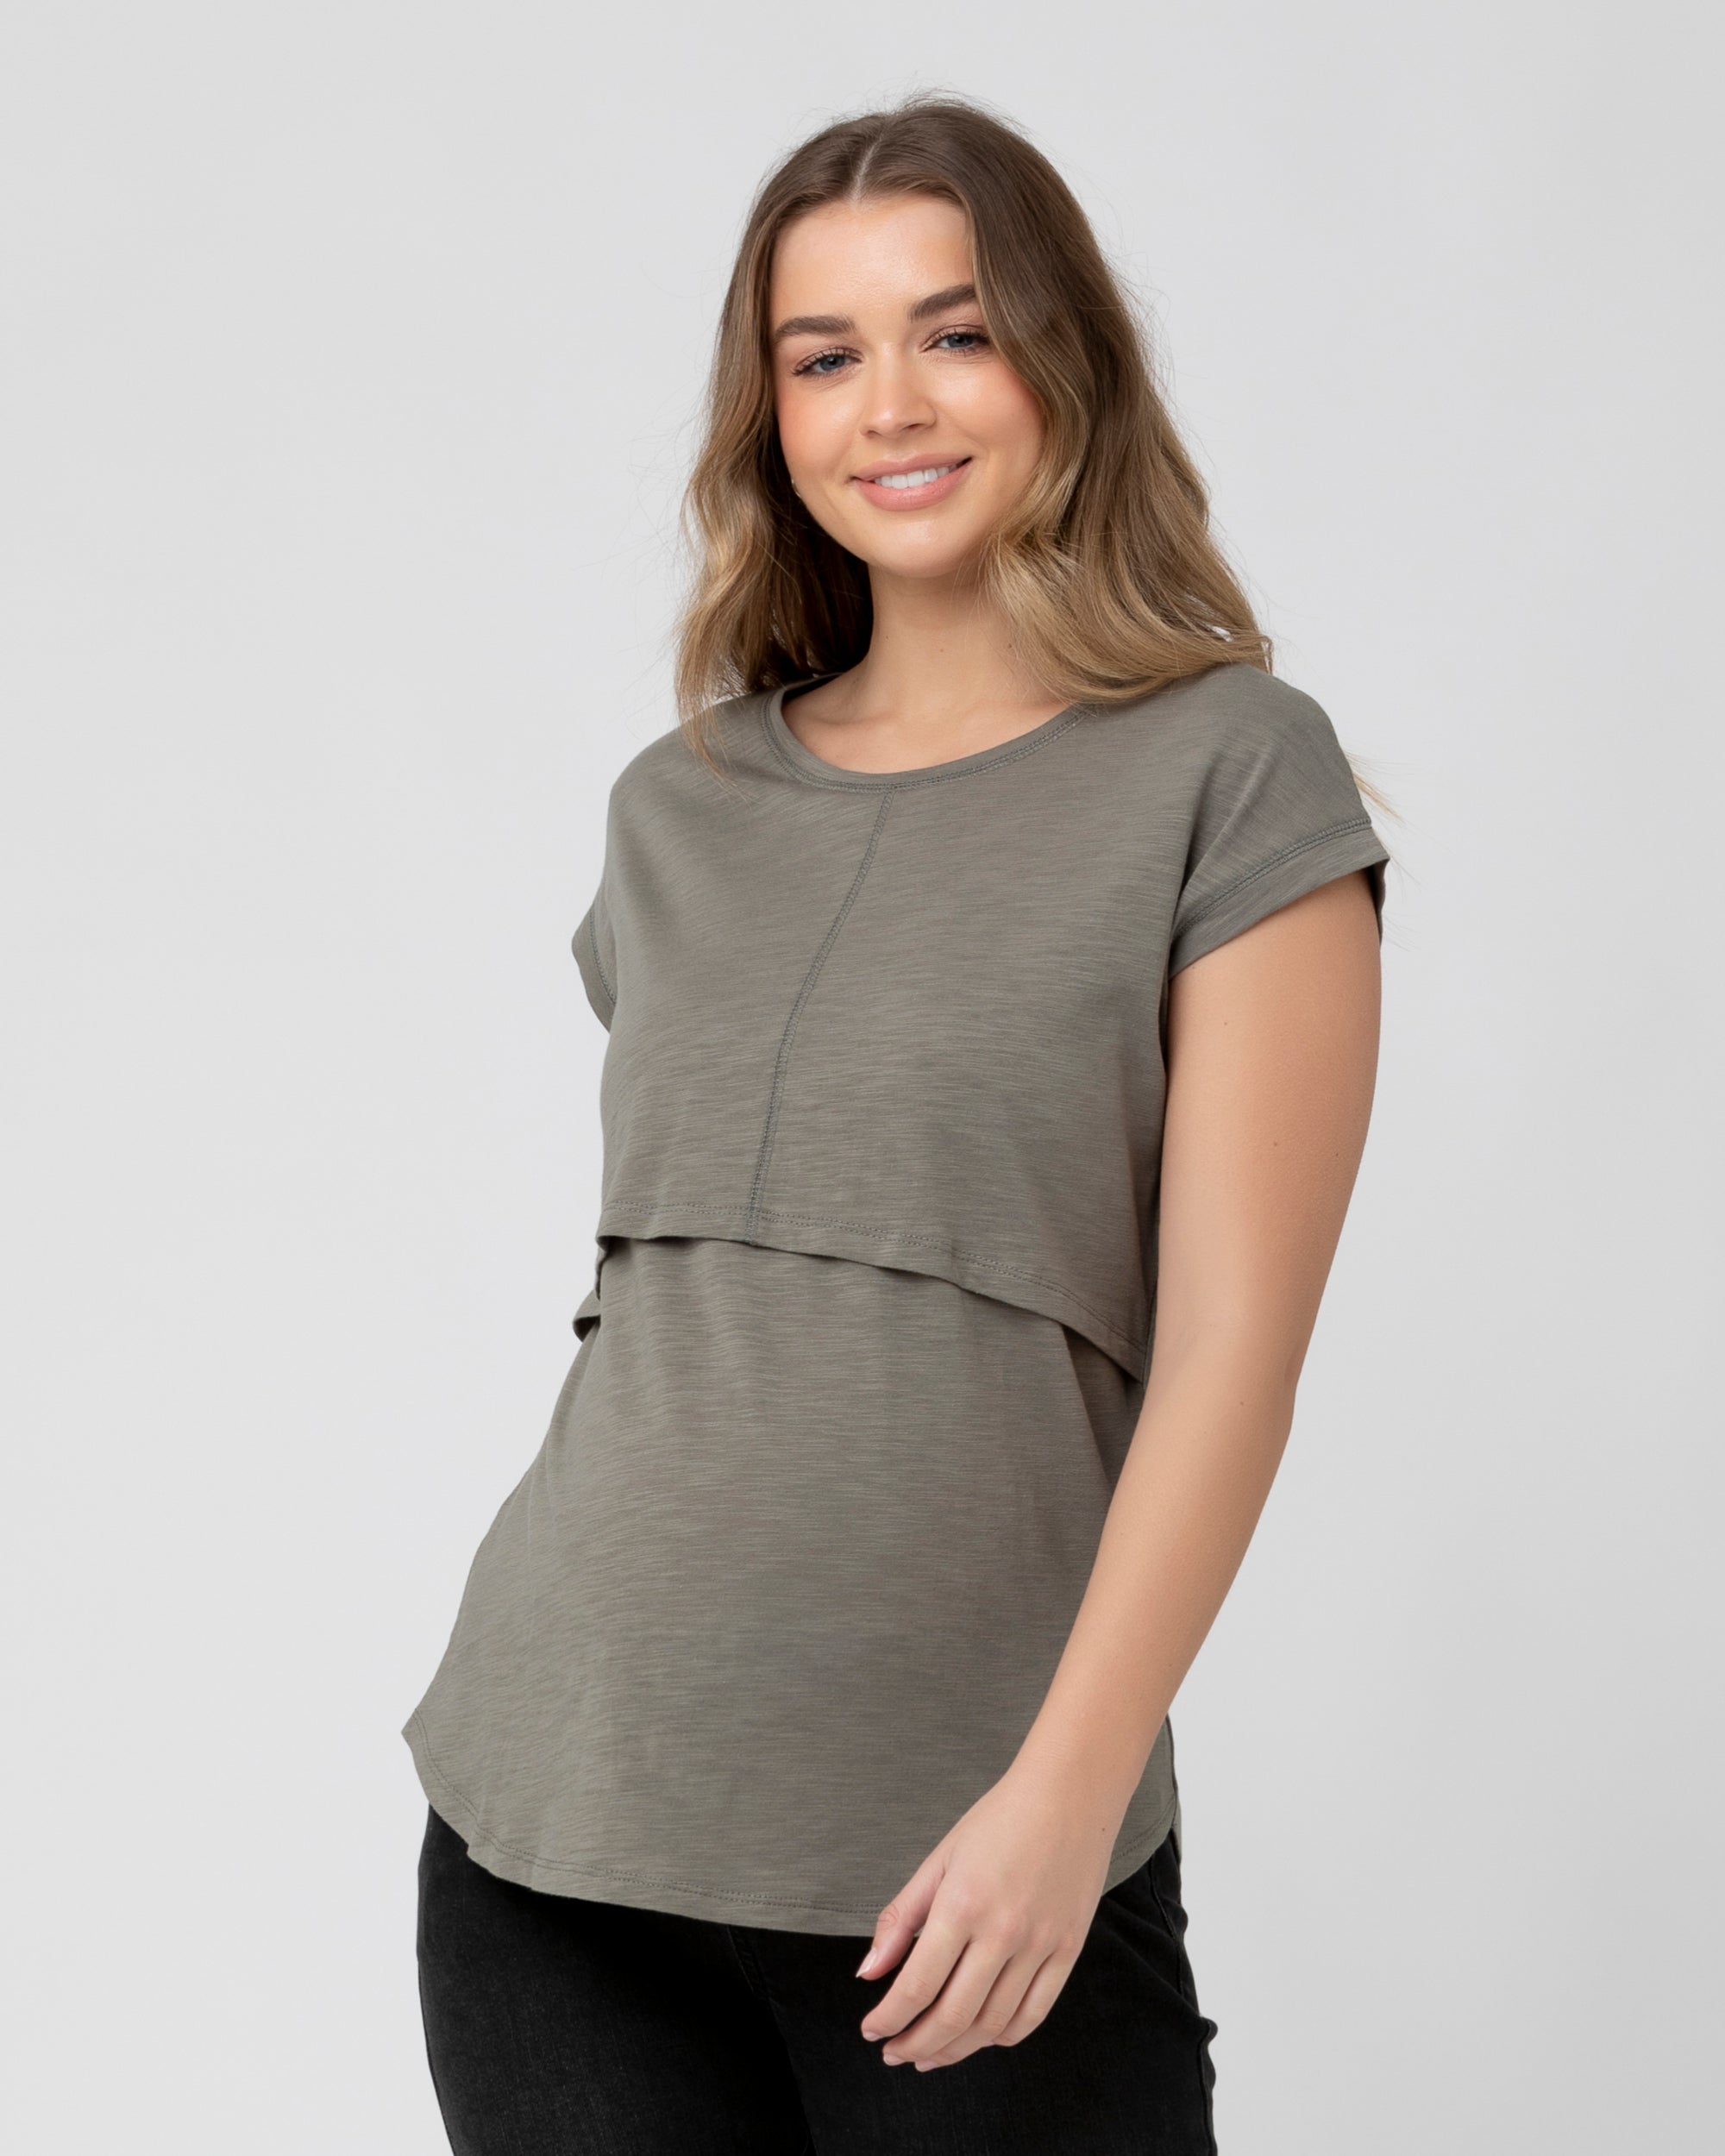 Maternity Activewear Tanks, Tops & Tees in Maternity Activewear 